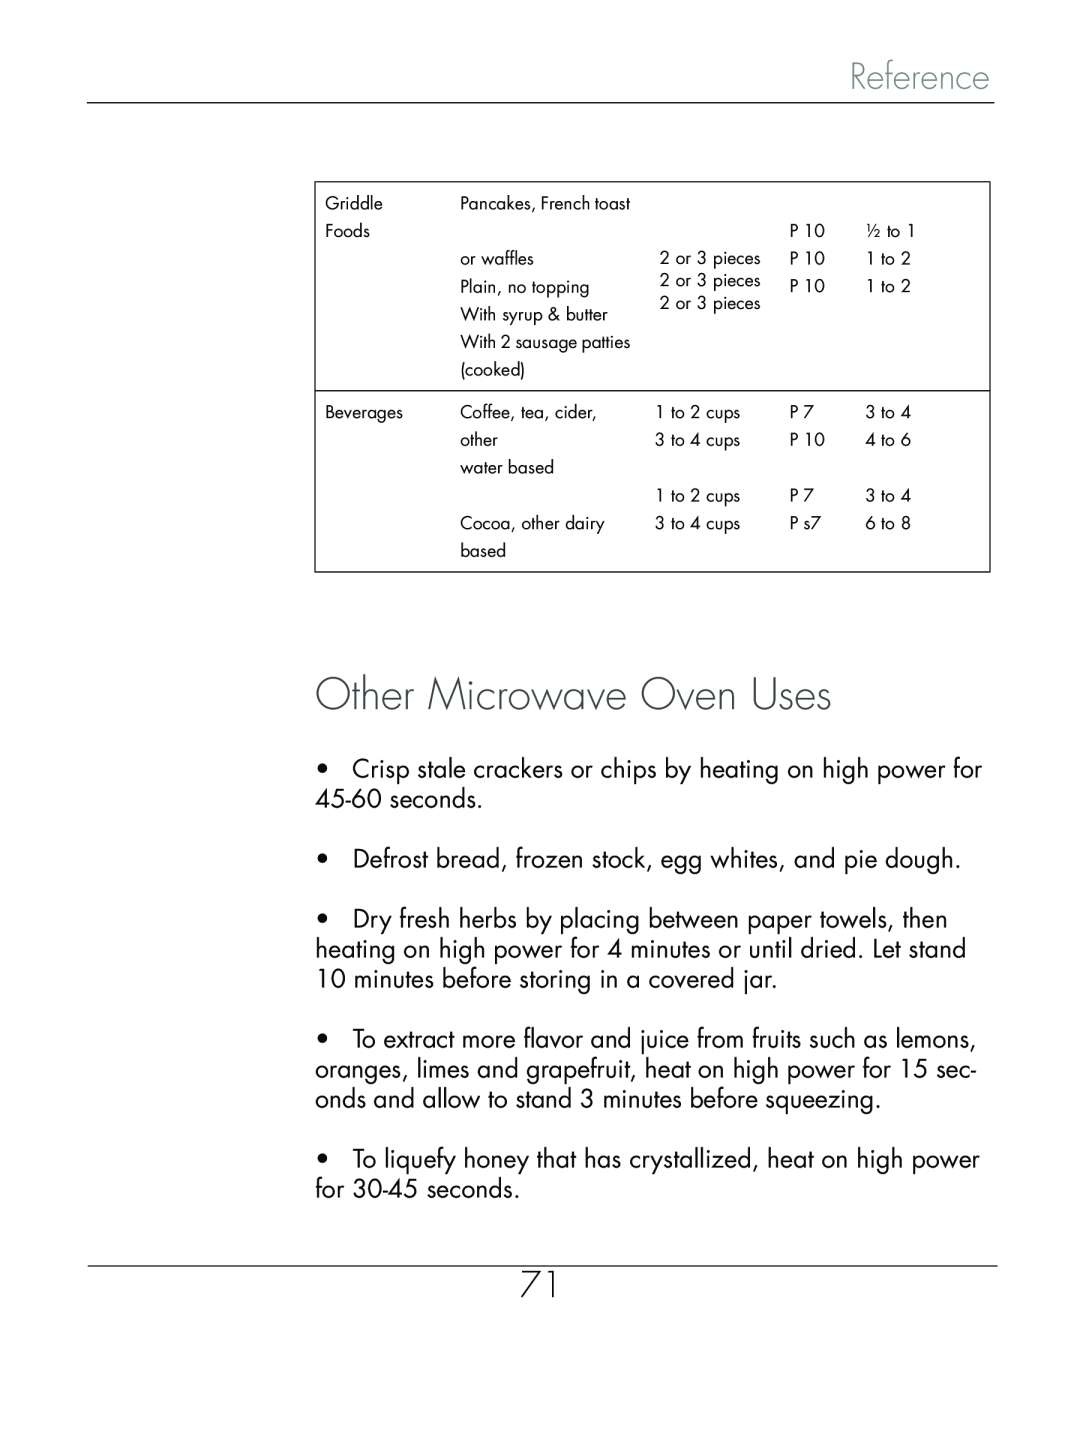 Beyond Microwace Oven manual Other Microwave Oven Uses, Reference 